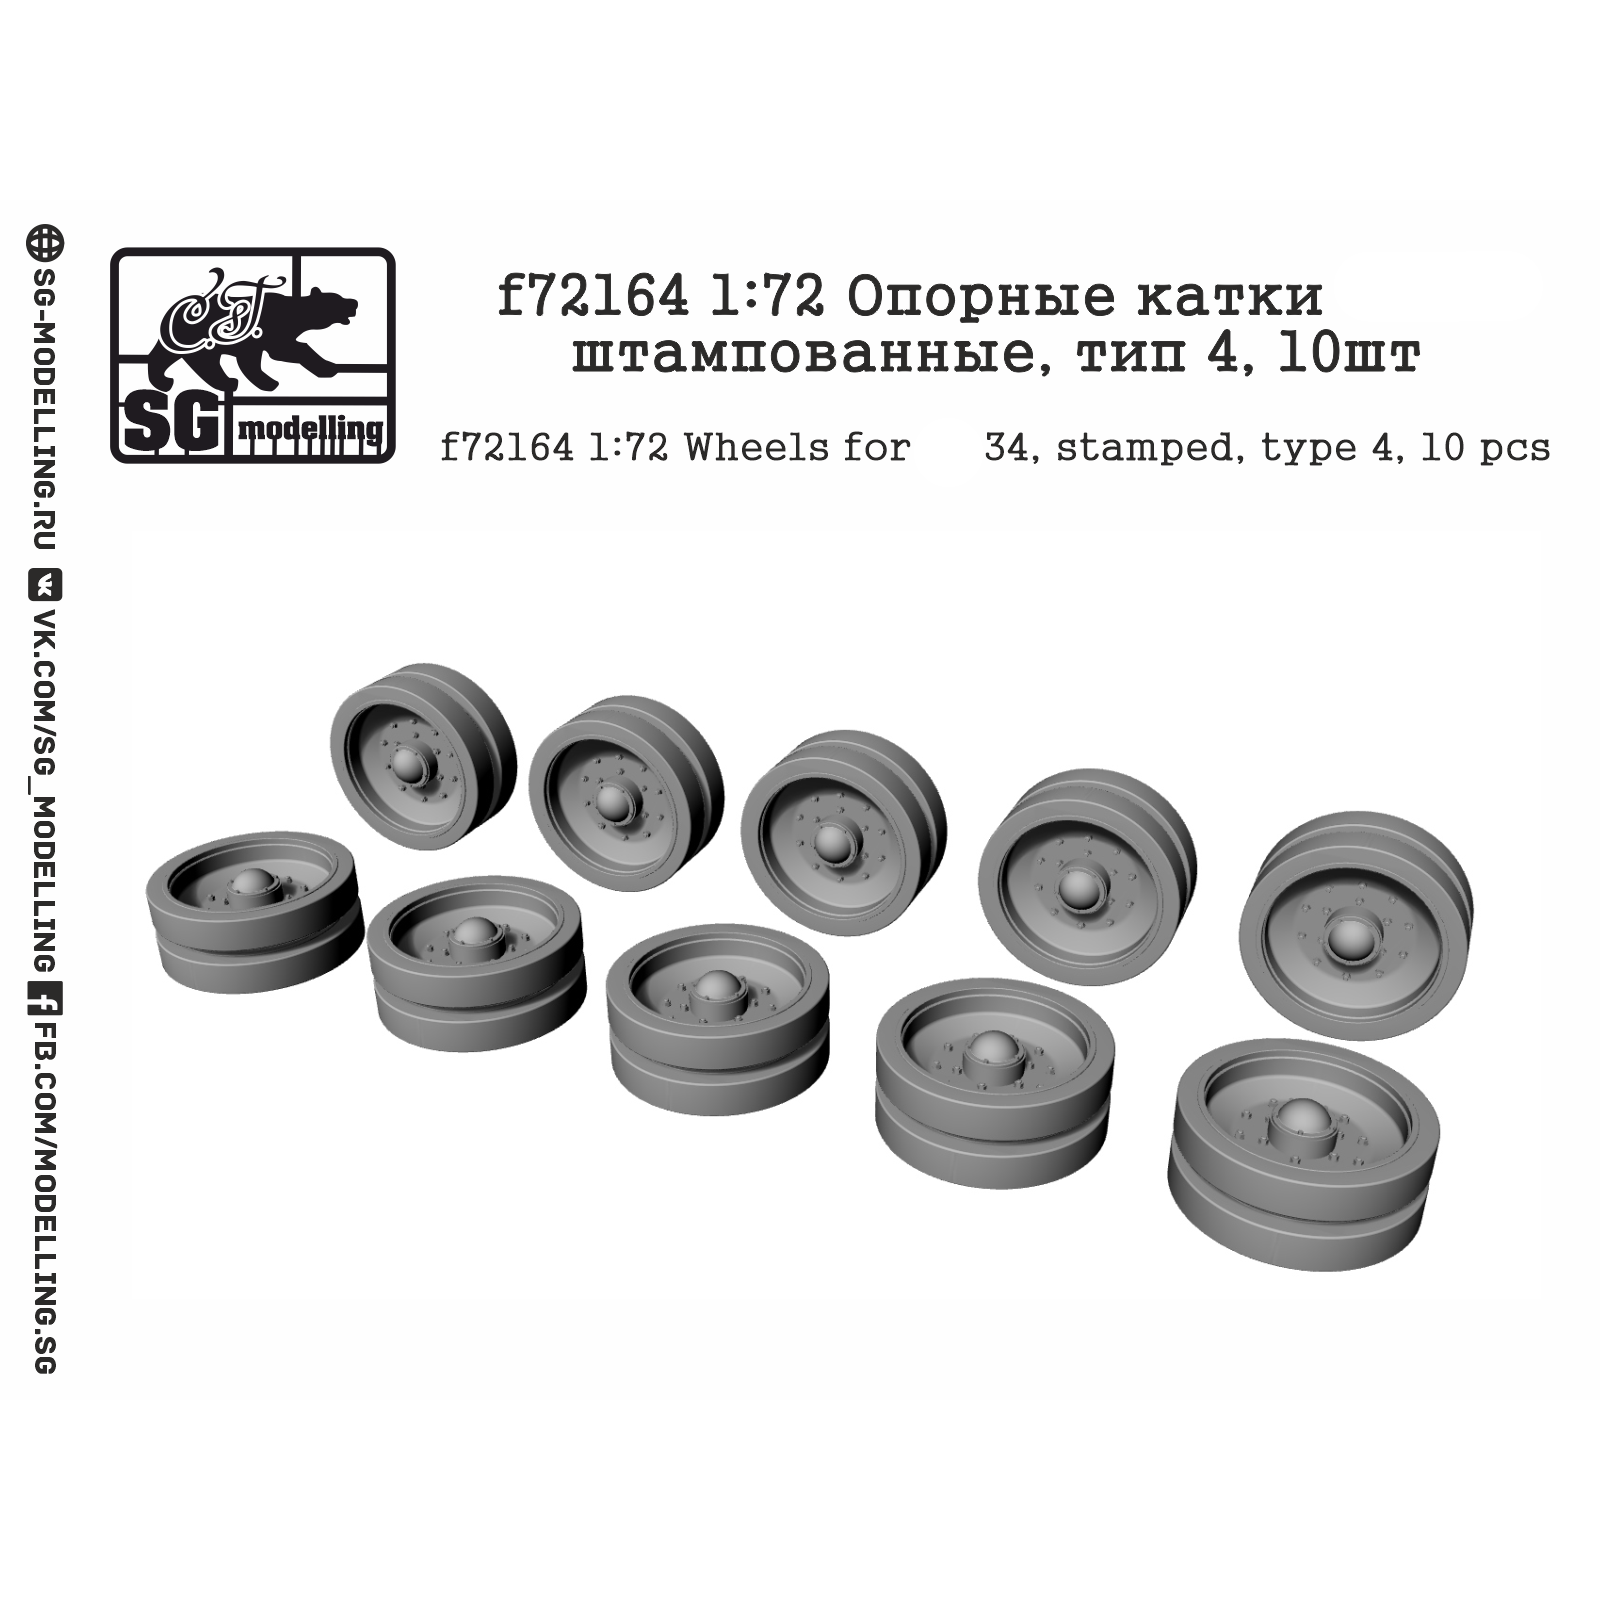 f72164 SG Modeling 1/72 Support rollers of tank 34 stamped, type 4, 10 pcs.